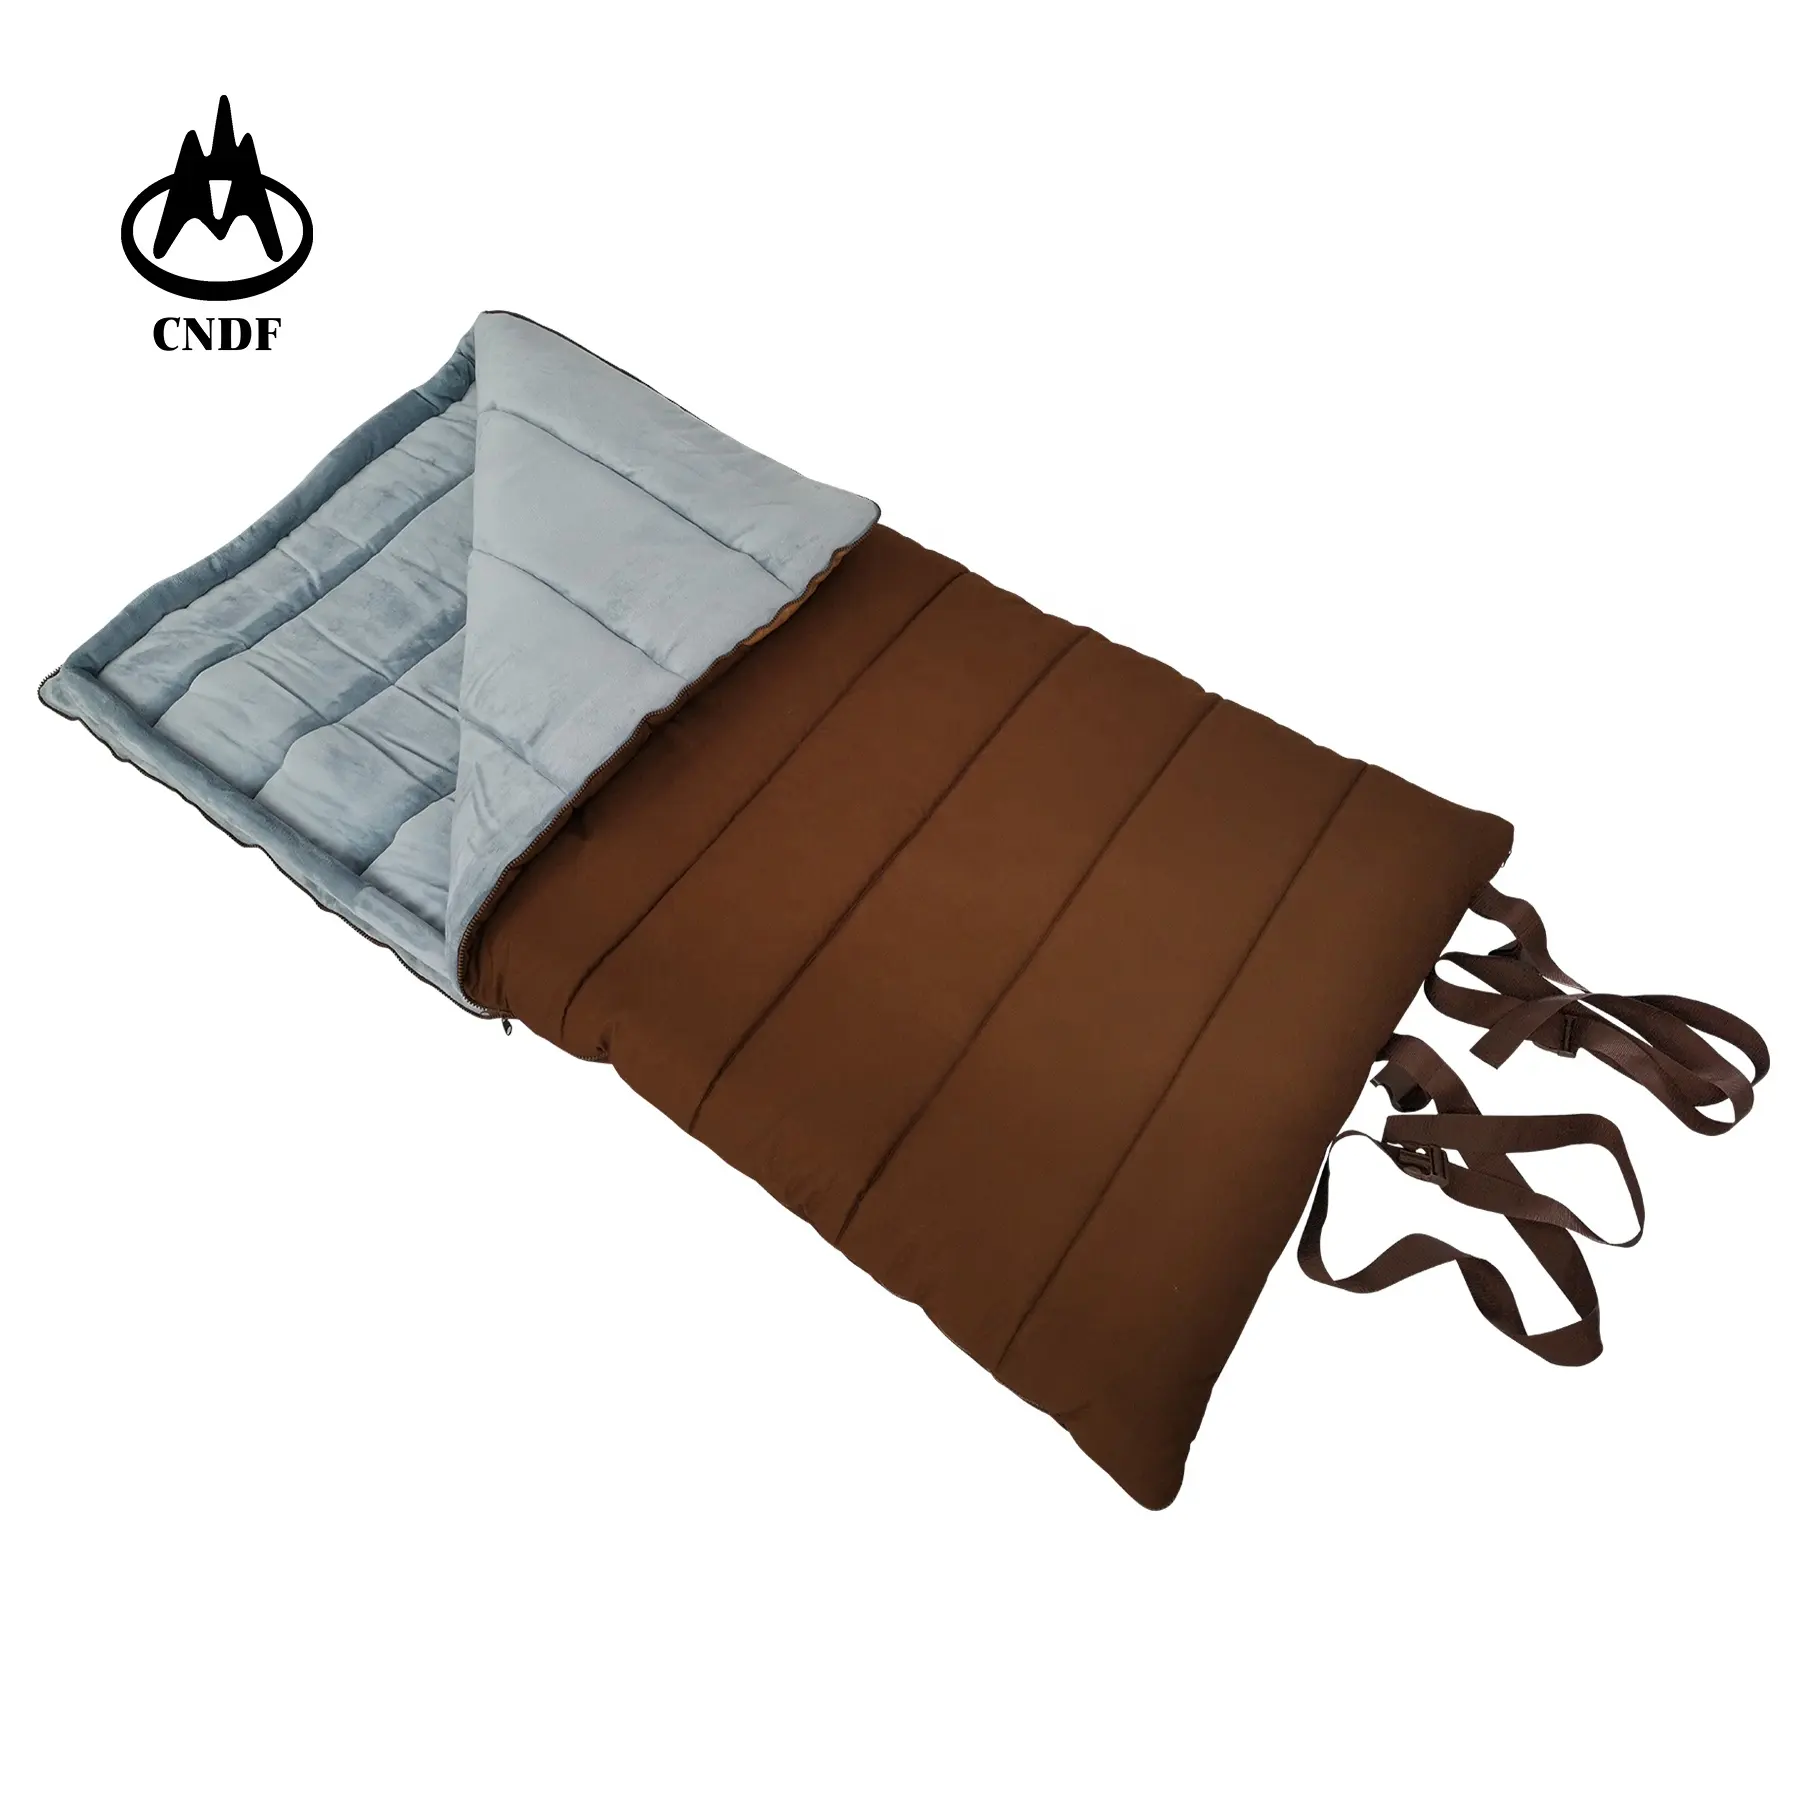 middle east big size Oxfod and canvas sleeping bag, warm comfortable new item, hunting, water proof